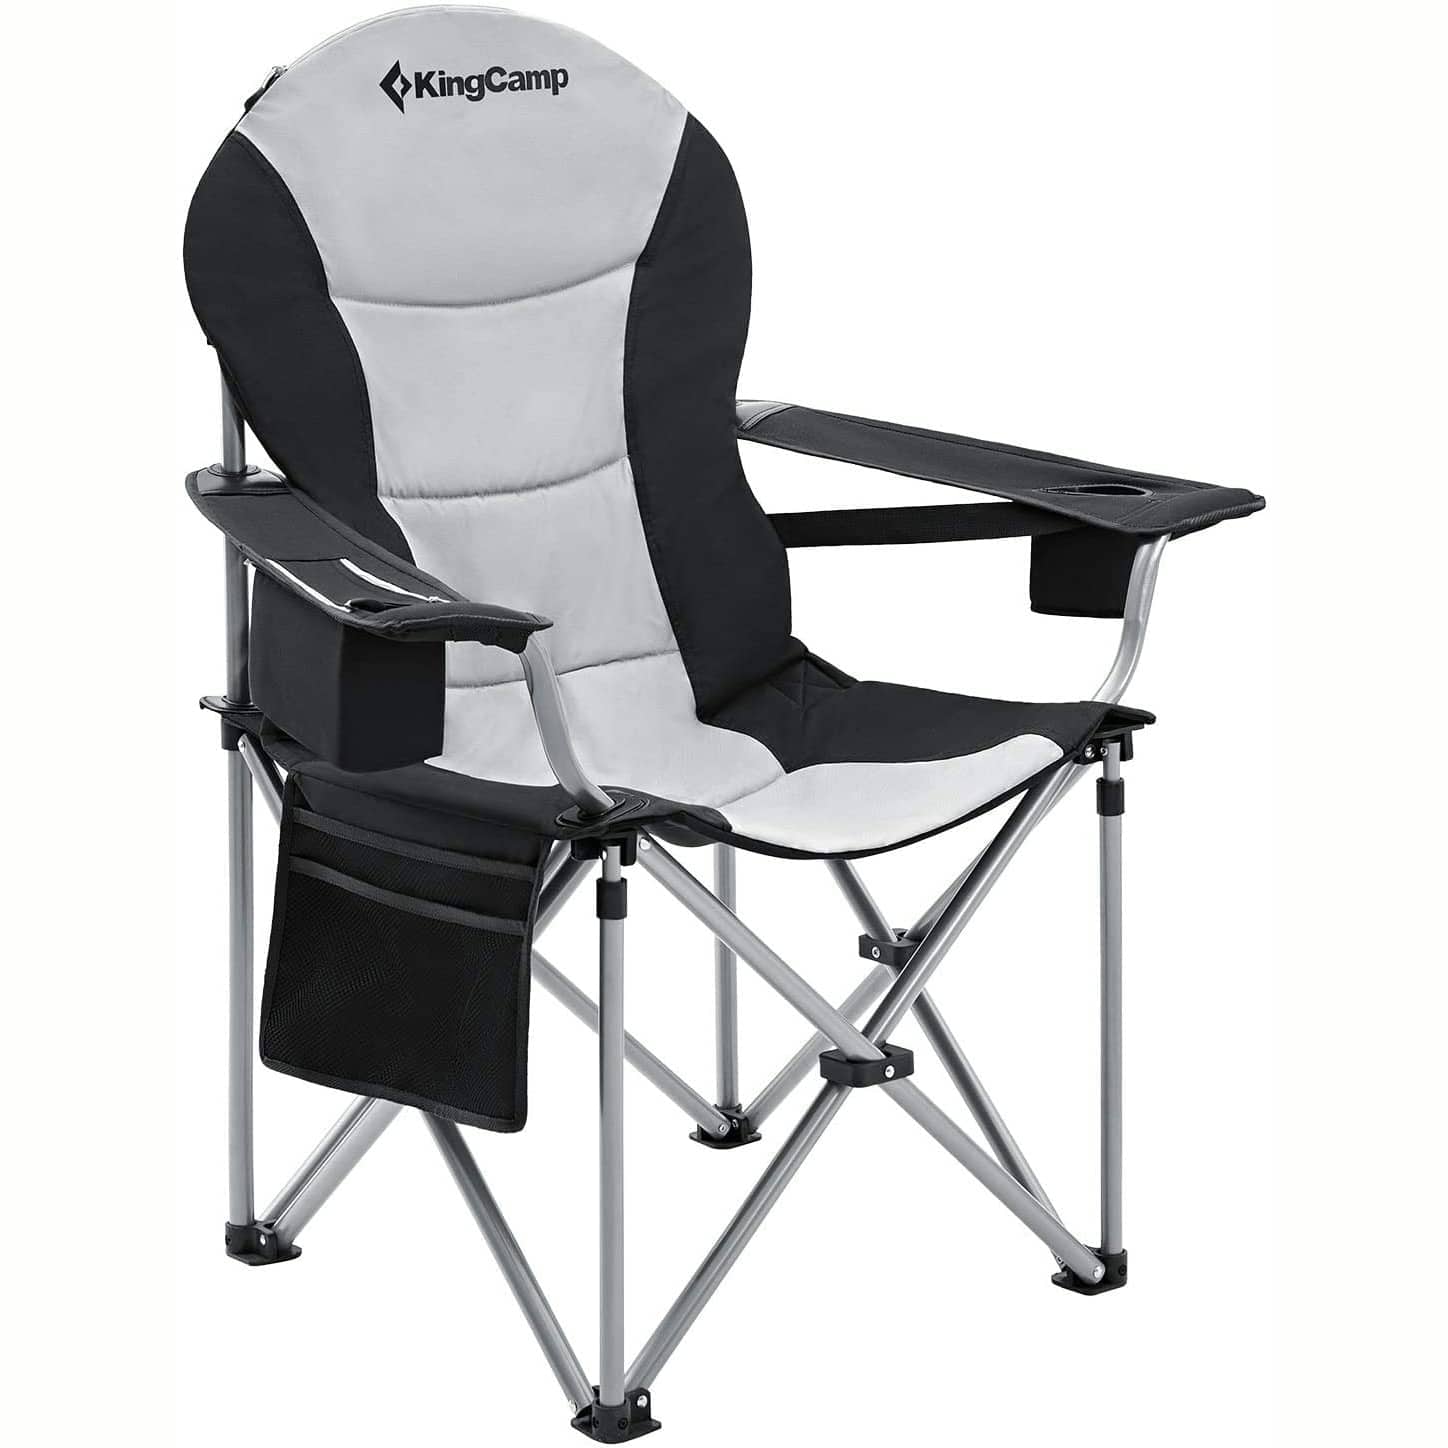 8. KingCamp Oversized Heavy Duty Padded Outdoor Camping Folding Chair With Lumbar Back Support Cooler Armrest Cup Holder Side Pocket Supports 353 Lbs 